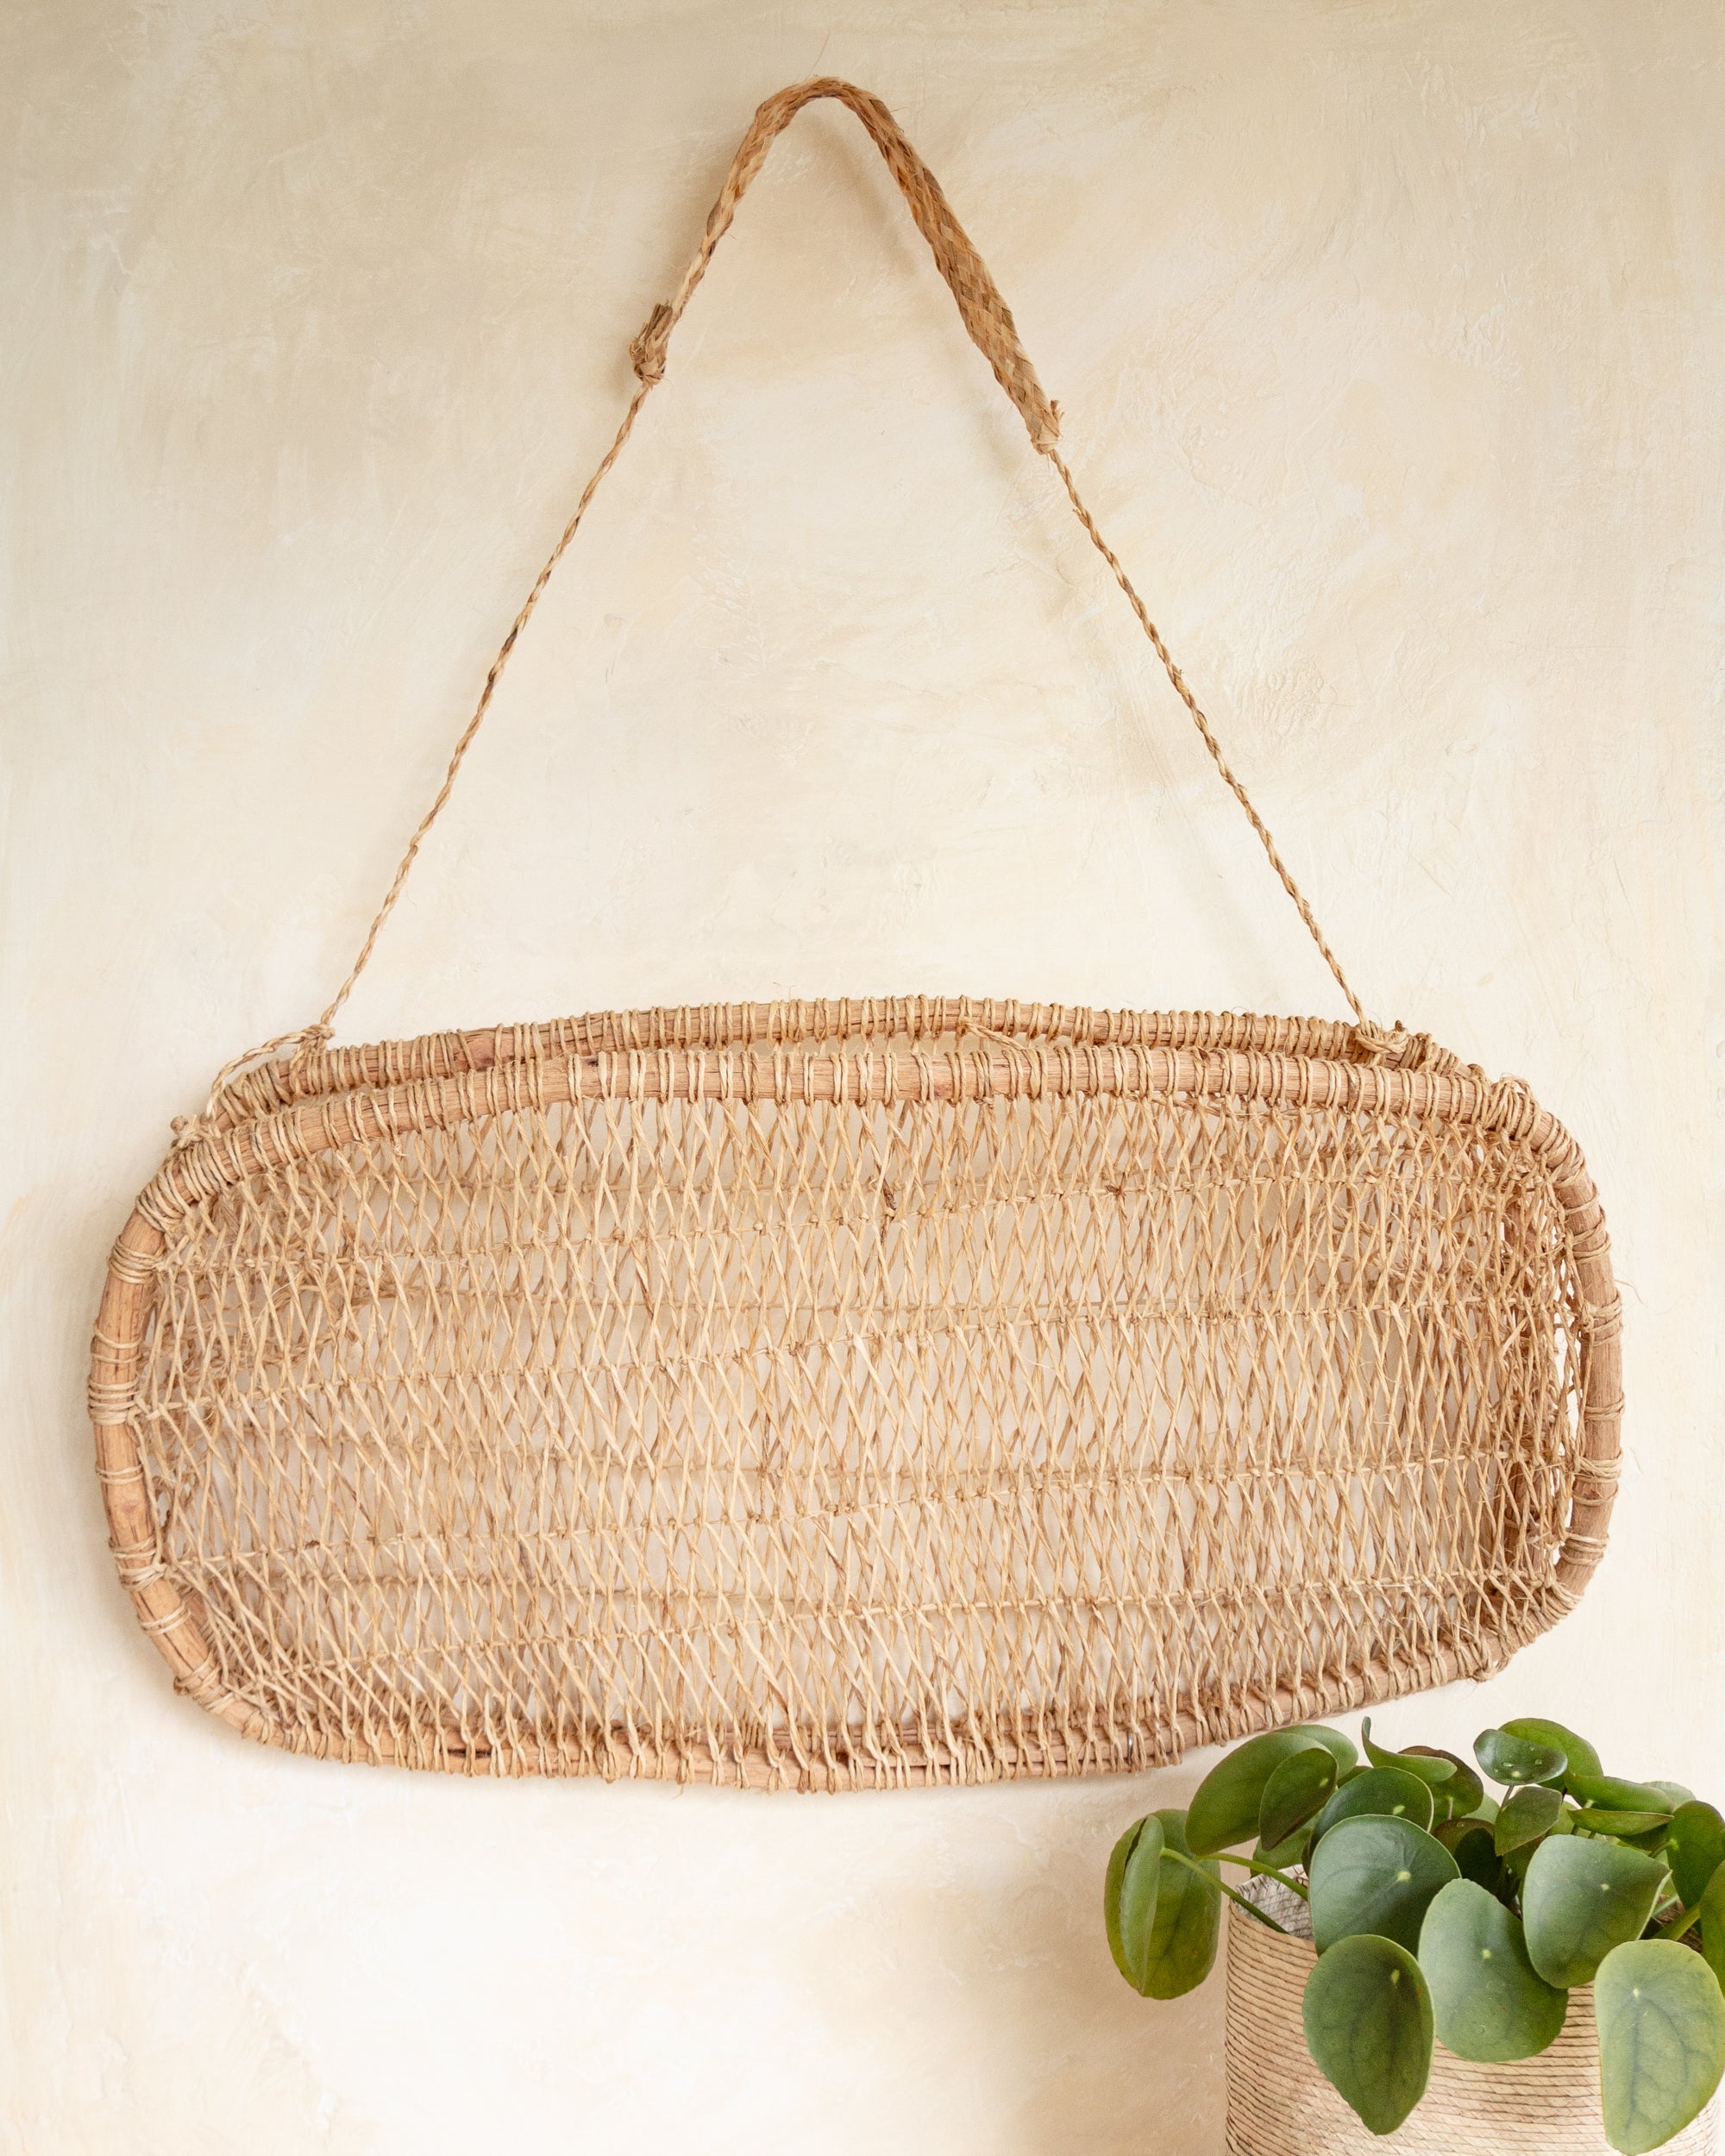 handwoven Jonote Wall Basket ethically made with jonote and bejuco fibers in Puebla, Mexico. 